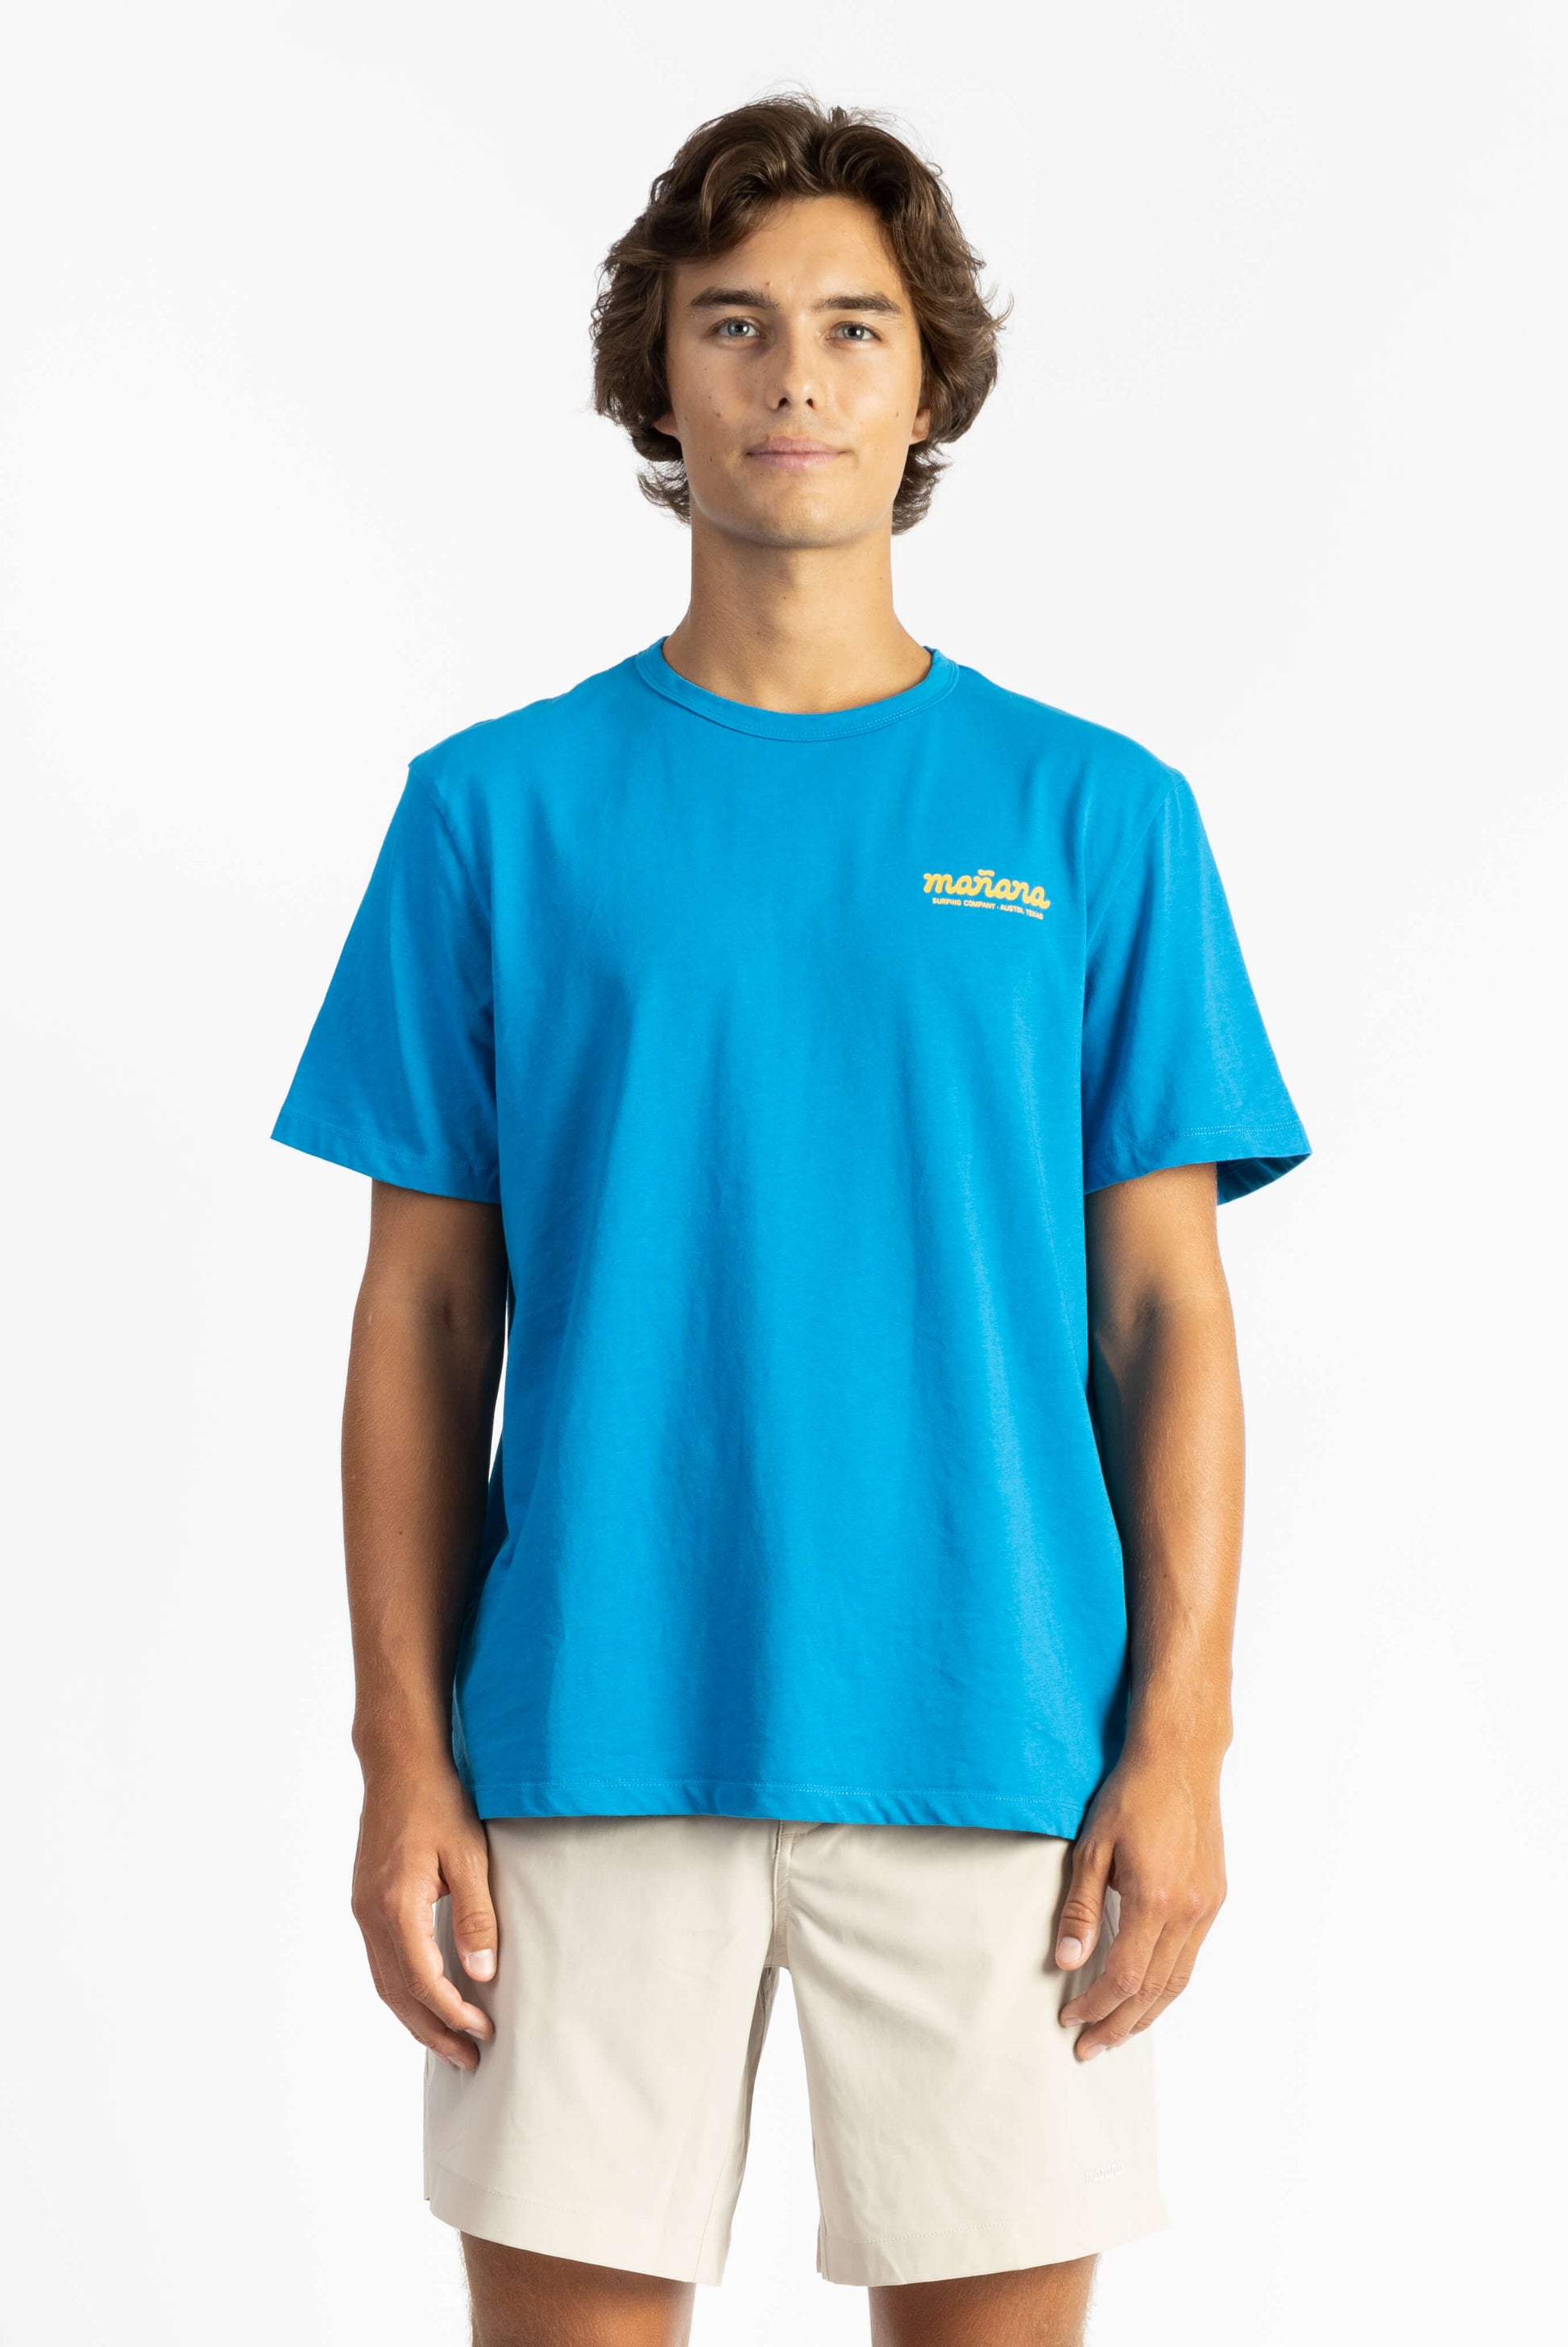 picture of a man wearing an ocean blue tee shirt with manana branding and white shorts